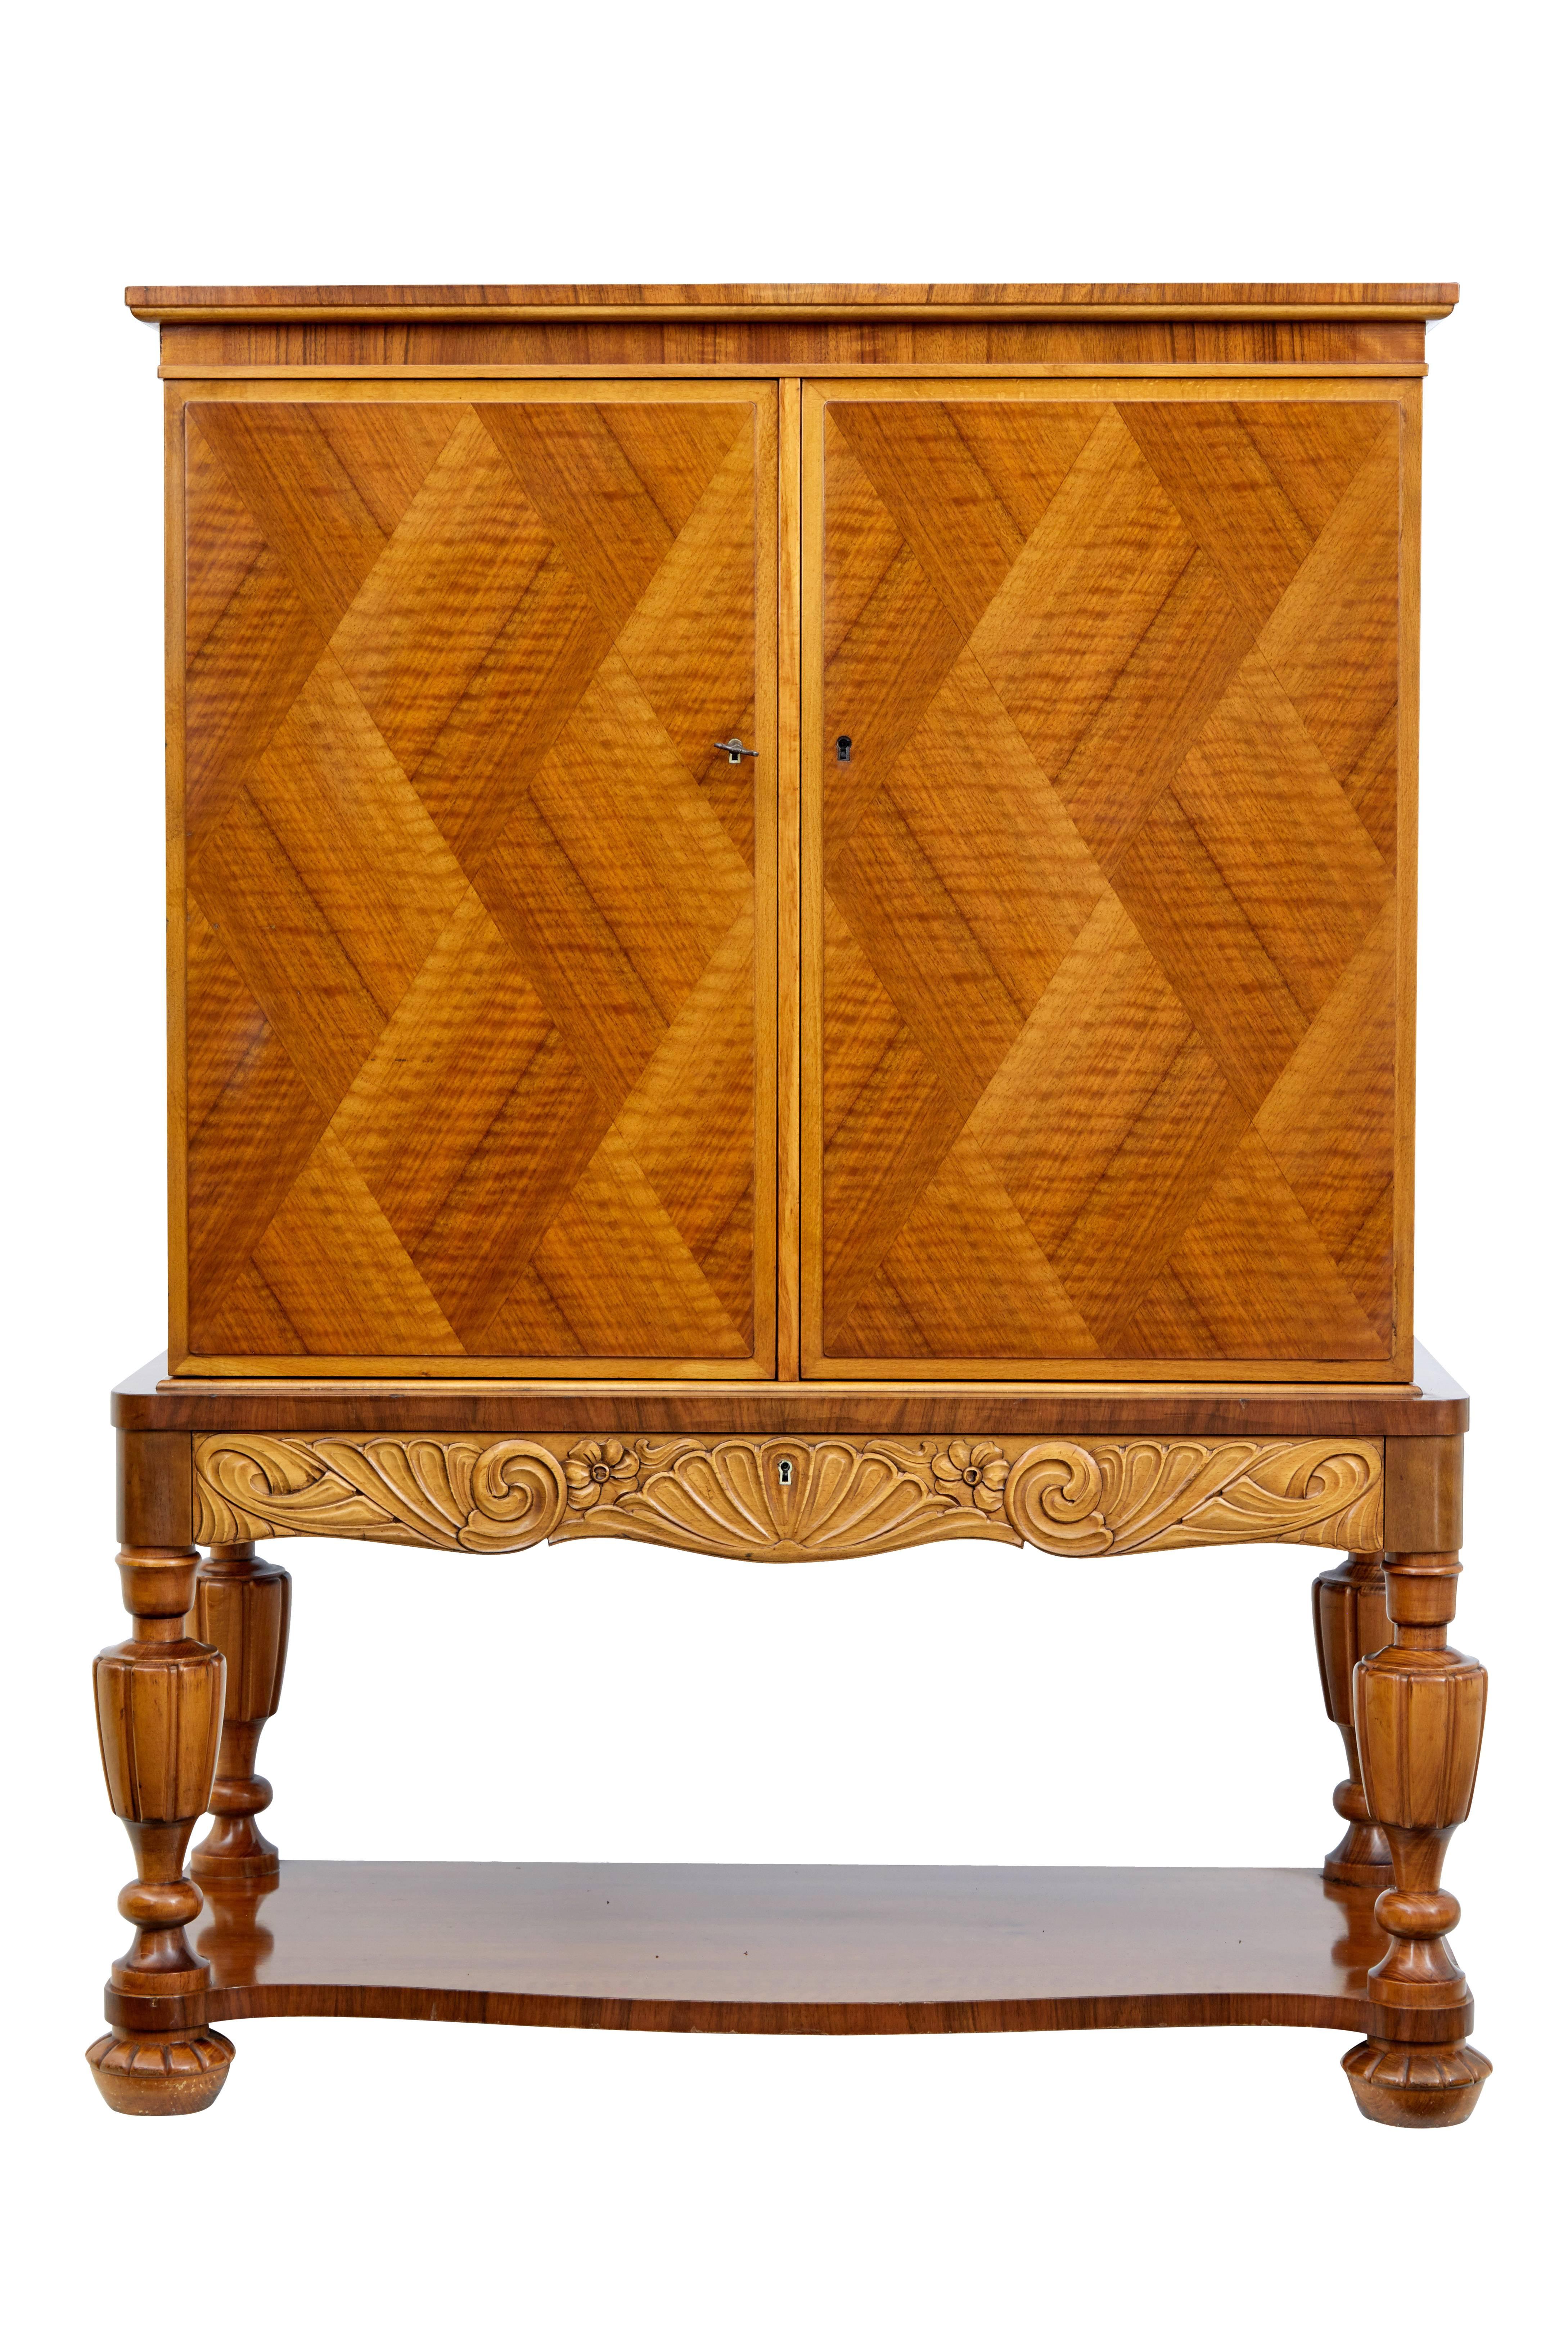 Decorative Art Deco cabinet on Stand circa 1930.
Diamond shaped veneer layout on the doors, with single carved drawer below.
Doors open to a partially fitted interior of 4 shelves and a bank of 3 drawers.
Standing on 4 baluster legs united by